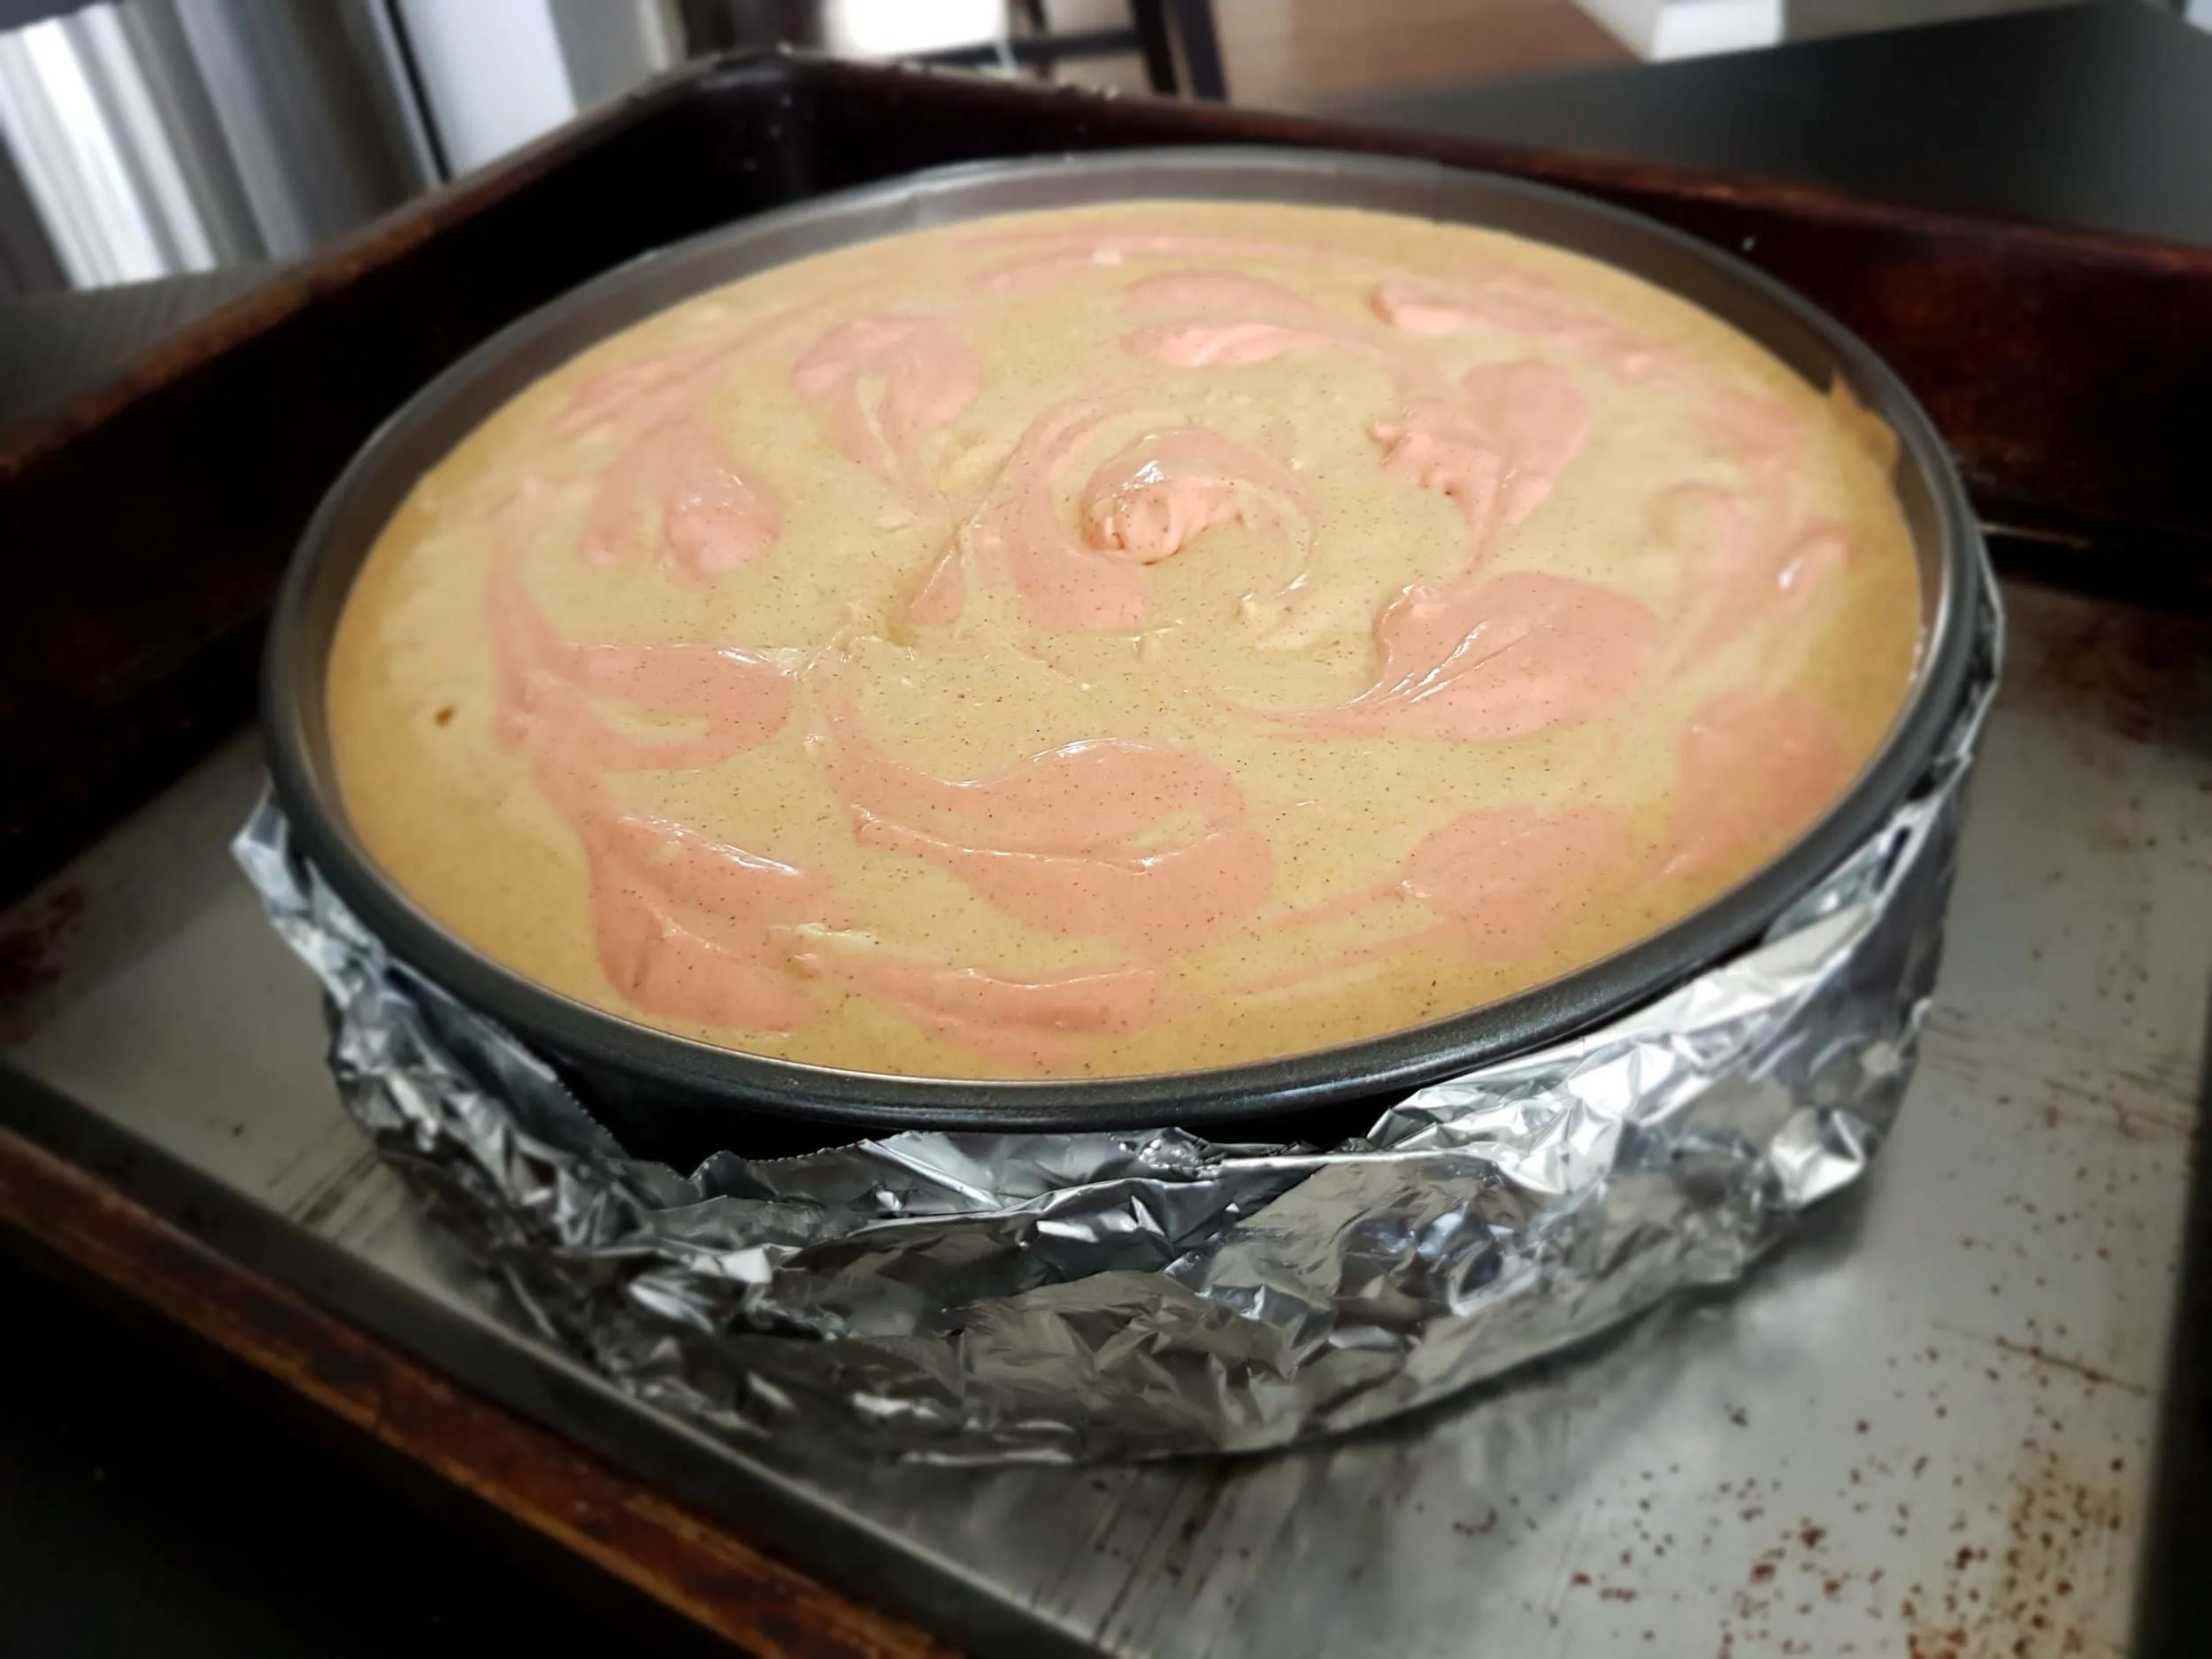 Baked Pumpkin Cheesecake in a water bath, ready for the oven.